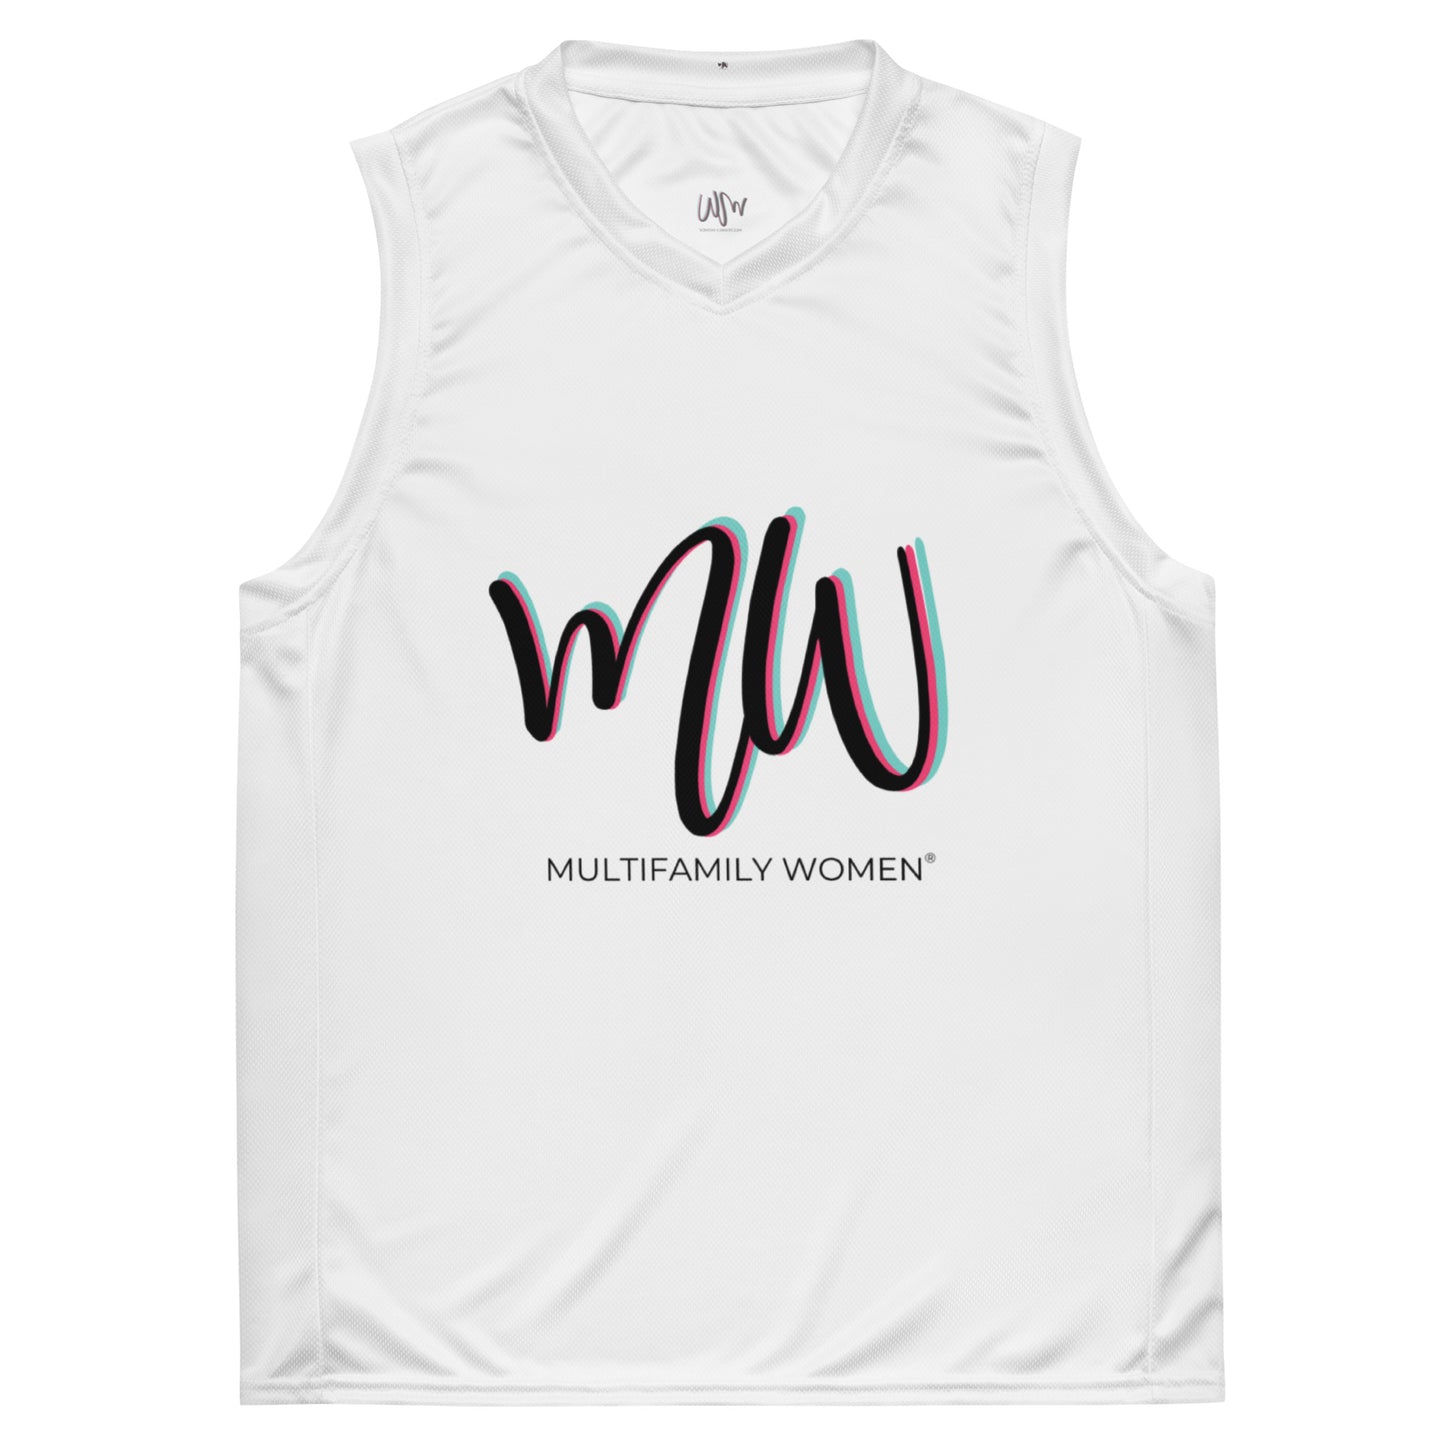 The Multifam-Champ - Recycled Basketball Jersey by Multifamily Women®